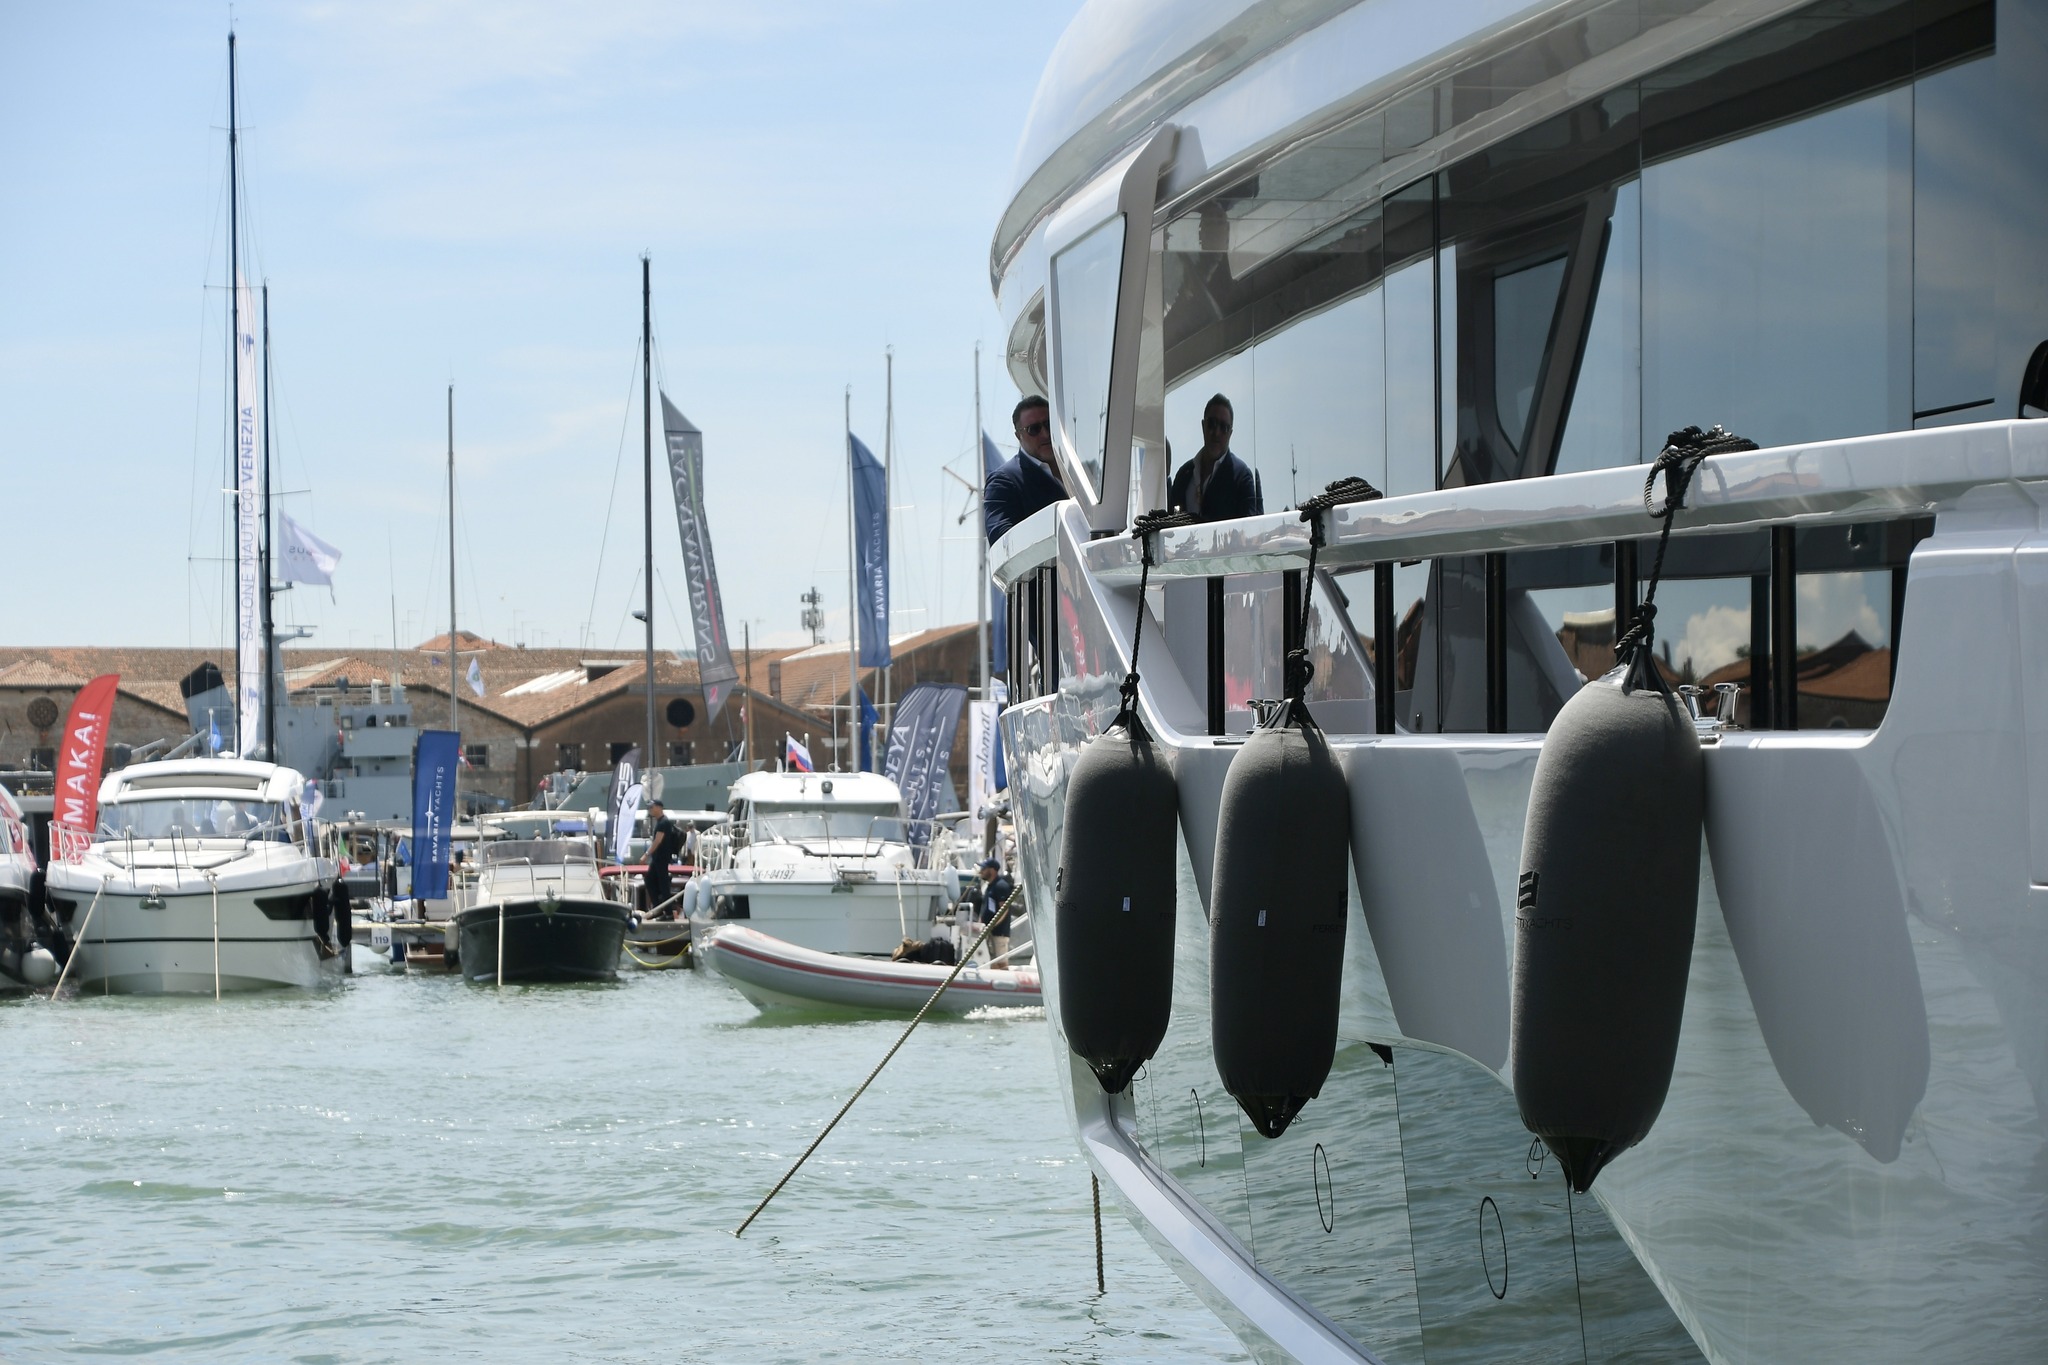 Venice Boat Show inaugurated: innovation and sustainability in focus